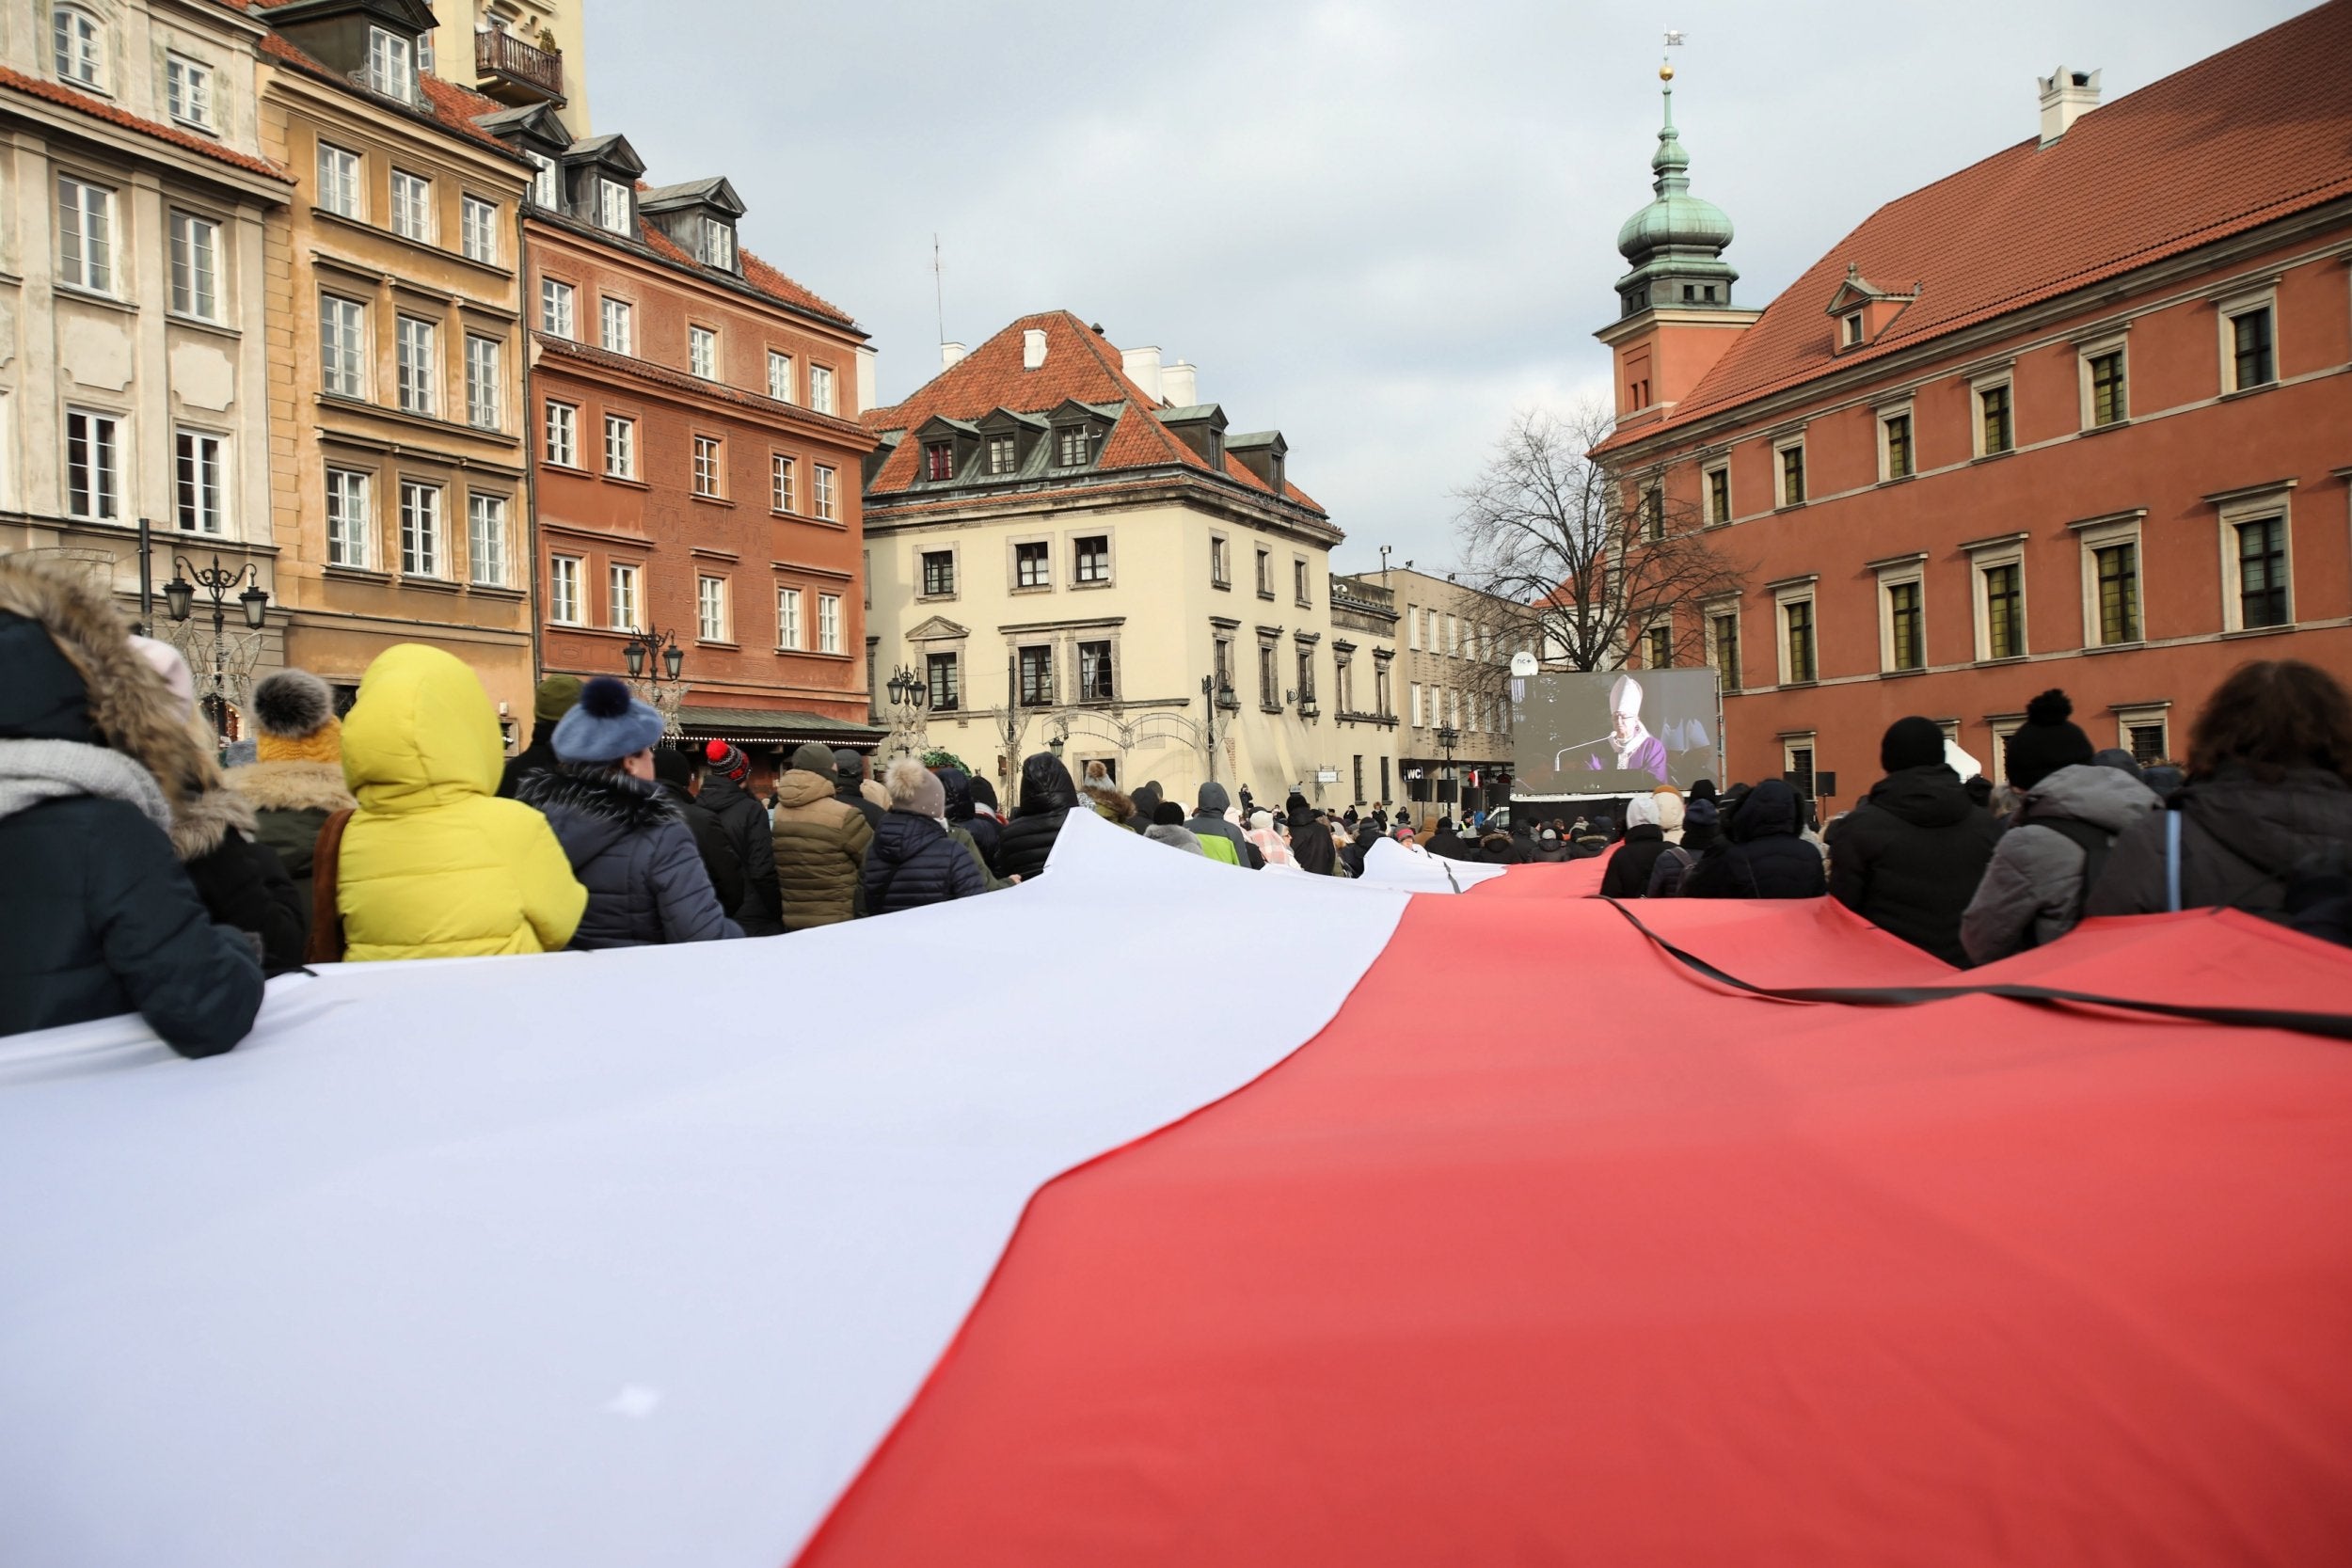 Mourners carry a giant Polish National flag as they gather to watch the funeral service